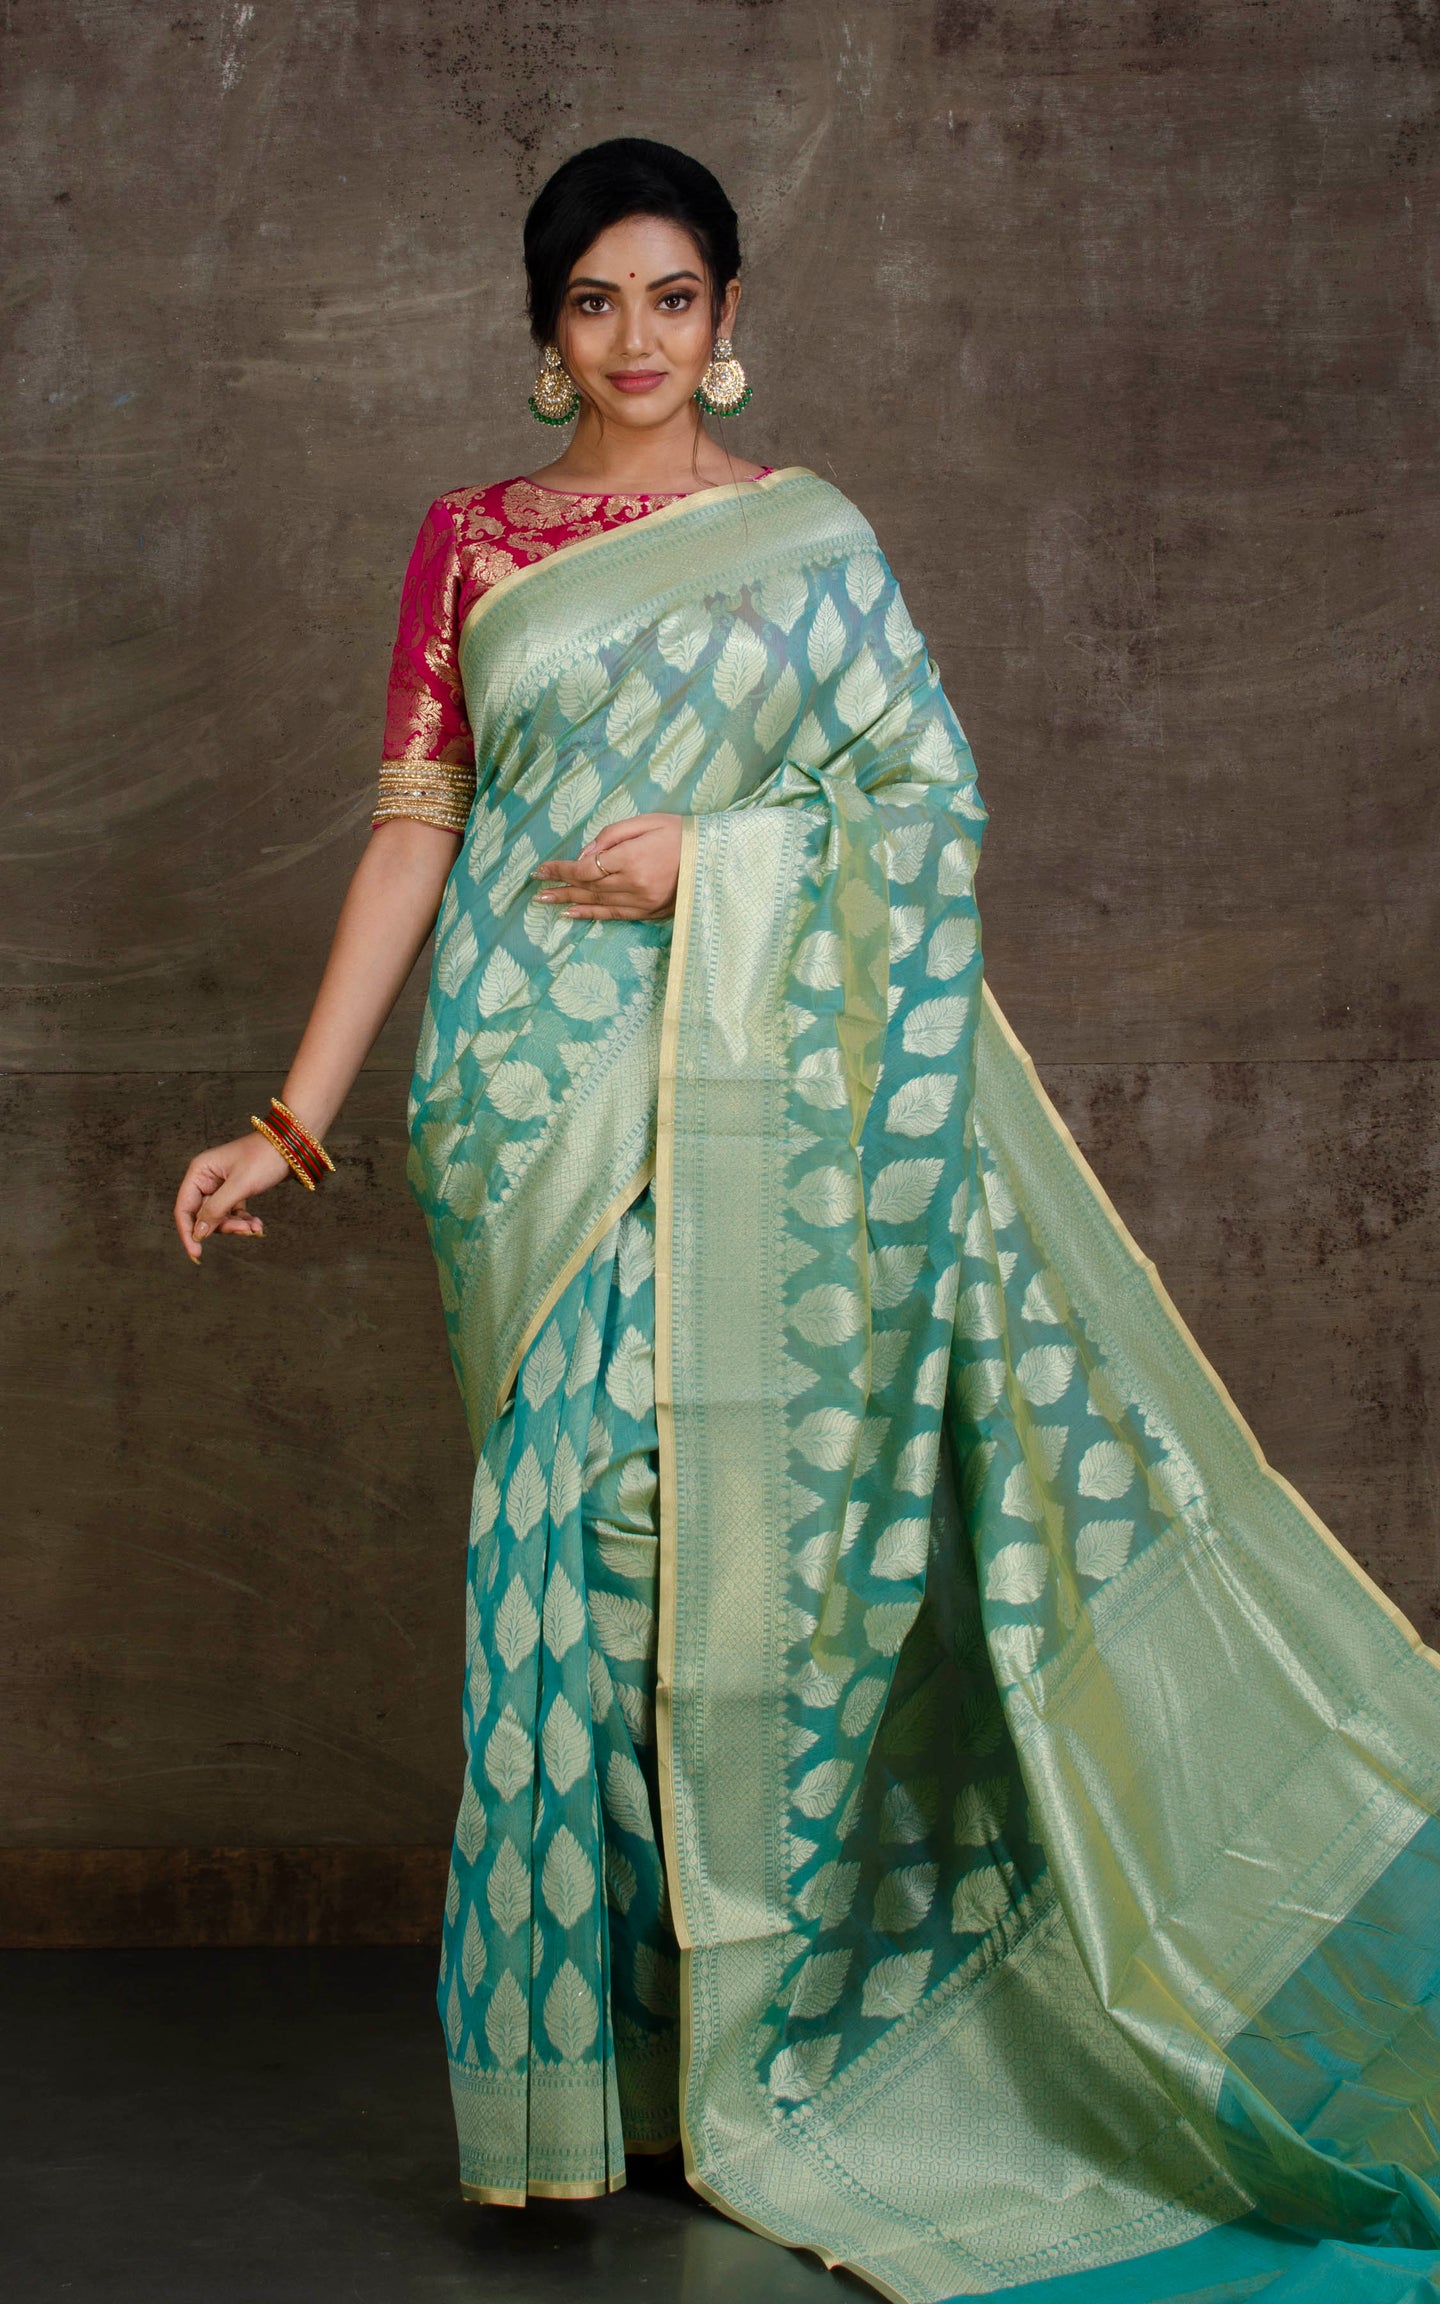 Handwoven Cotton Chanderi Saree in Lucite Green, Beige and Muted Gold